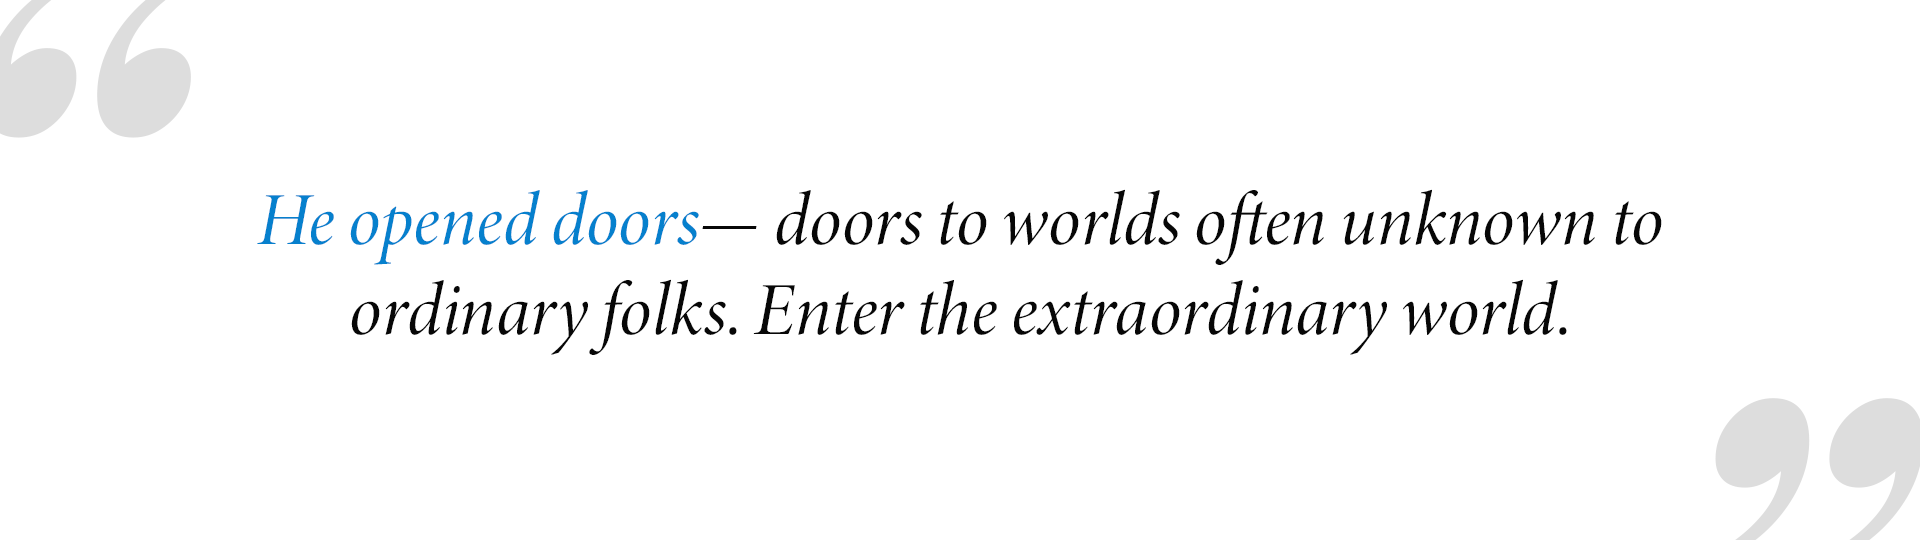 He opened doors— doors to worlds often unknown to
ordinary folks. Enter the extraordinary world.